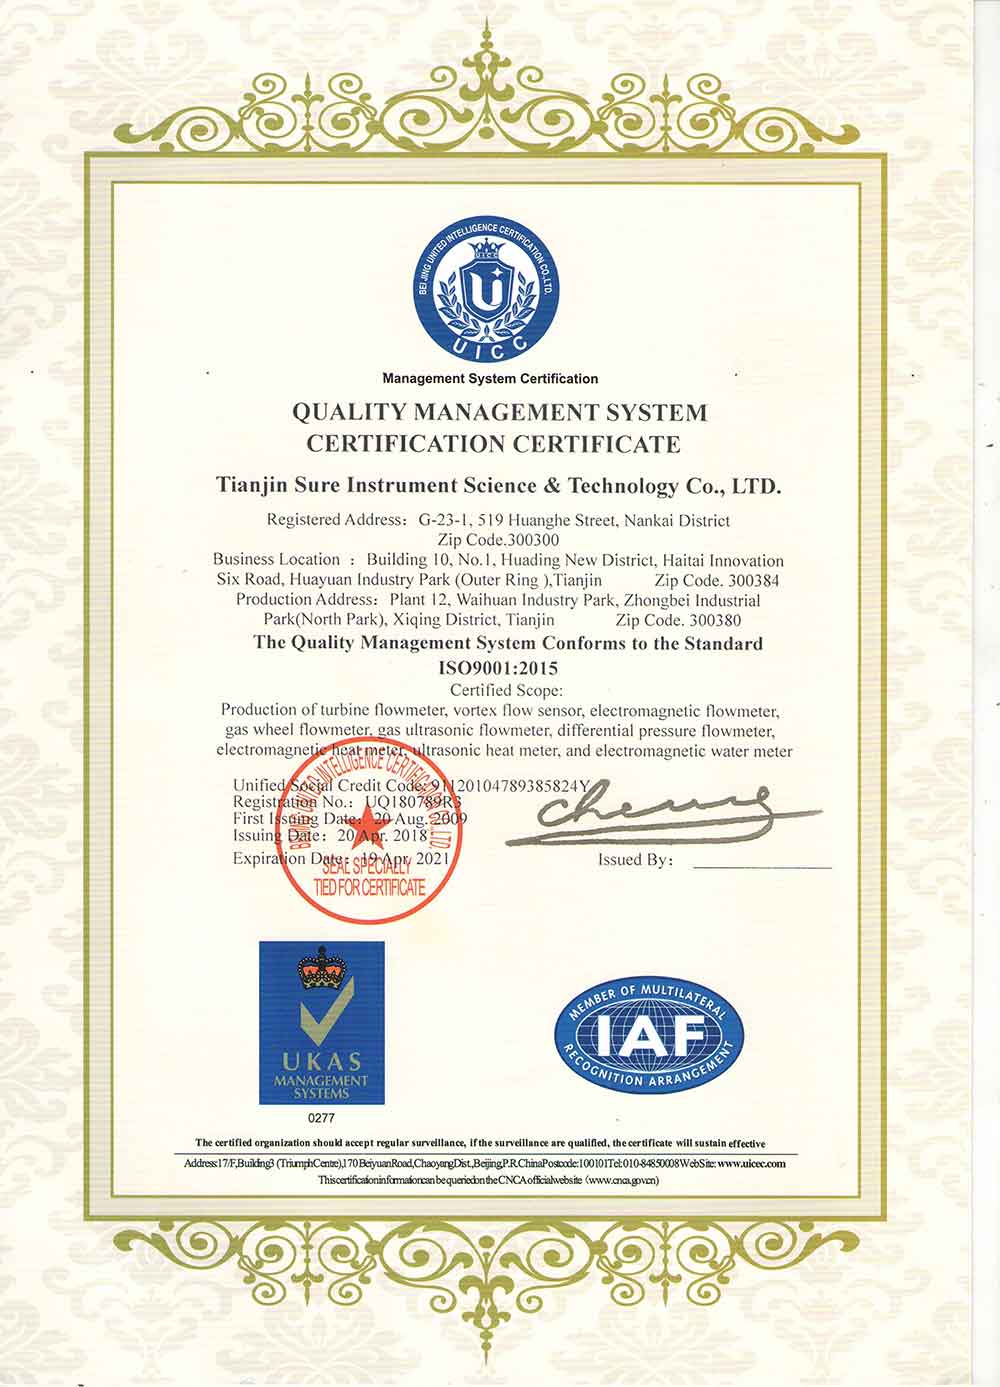  Quality-management-system-certification-certifacate---ISO9001